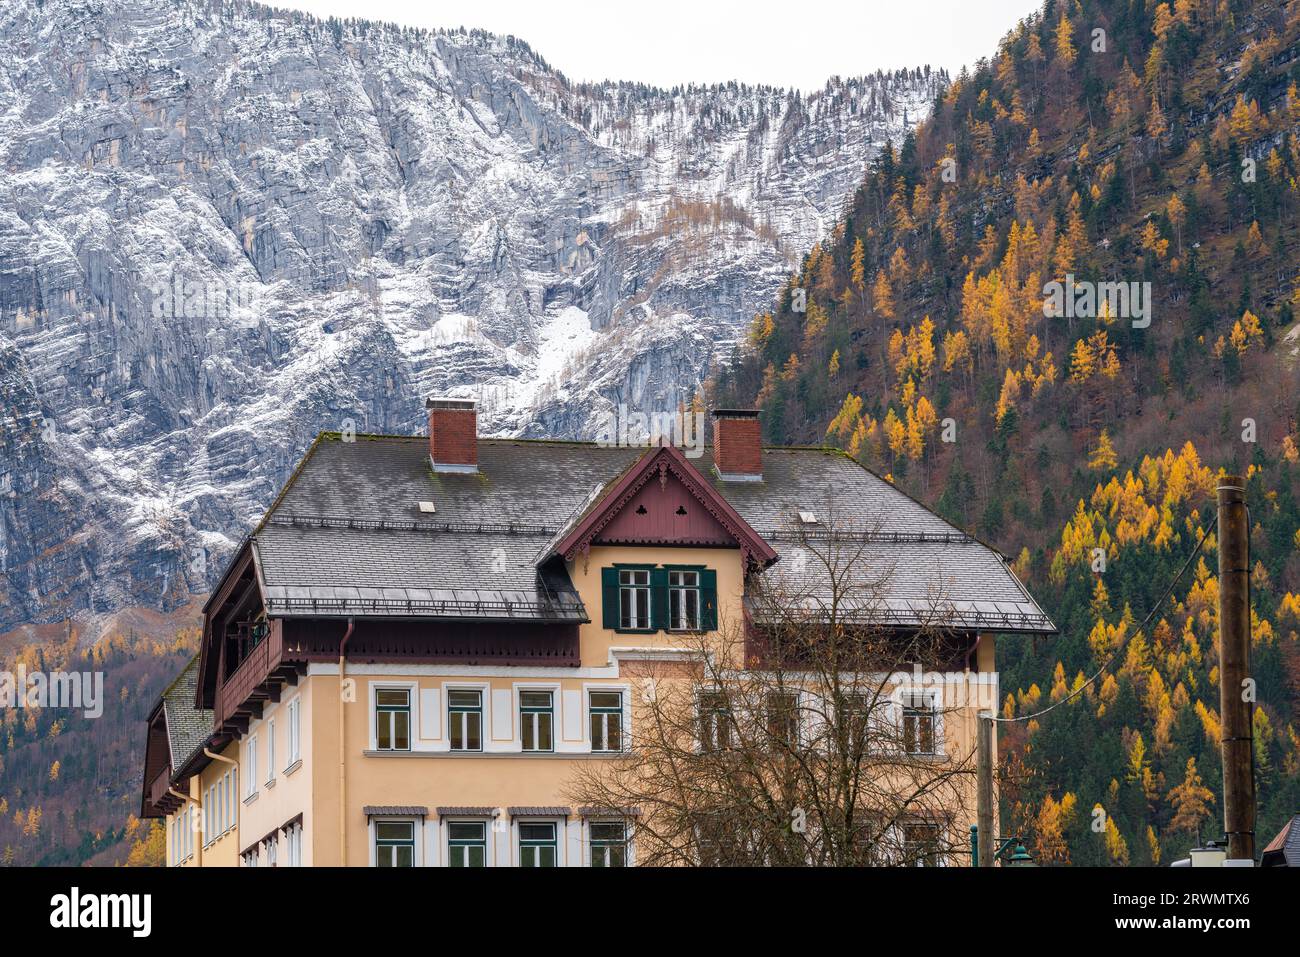 Building with Alps Mountains on background - covered in snow and autumn vegetation - Hallstatt, Austria Stock Photo